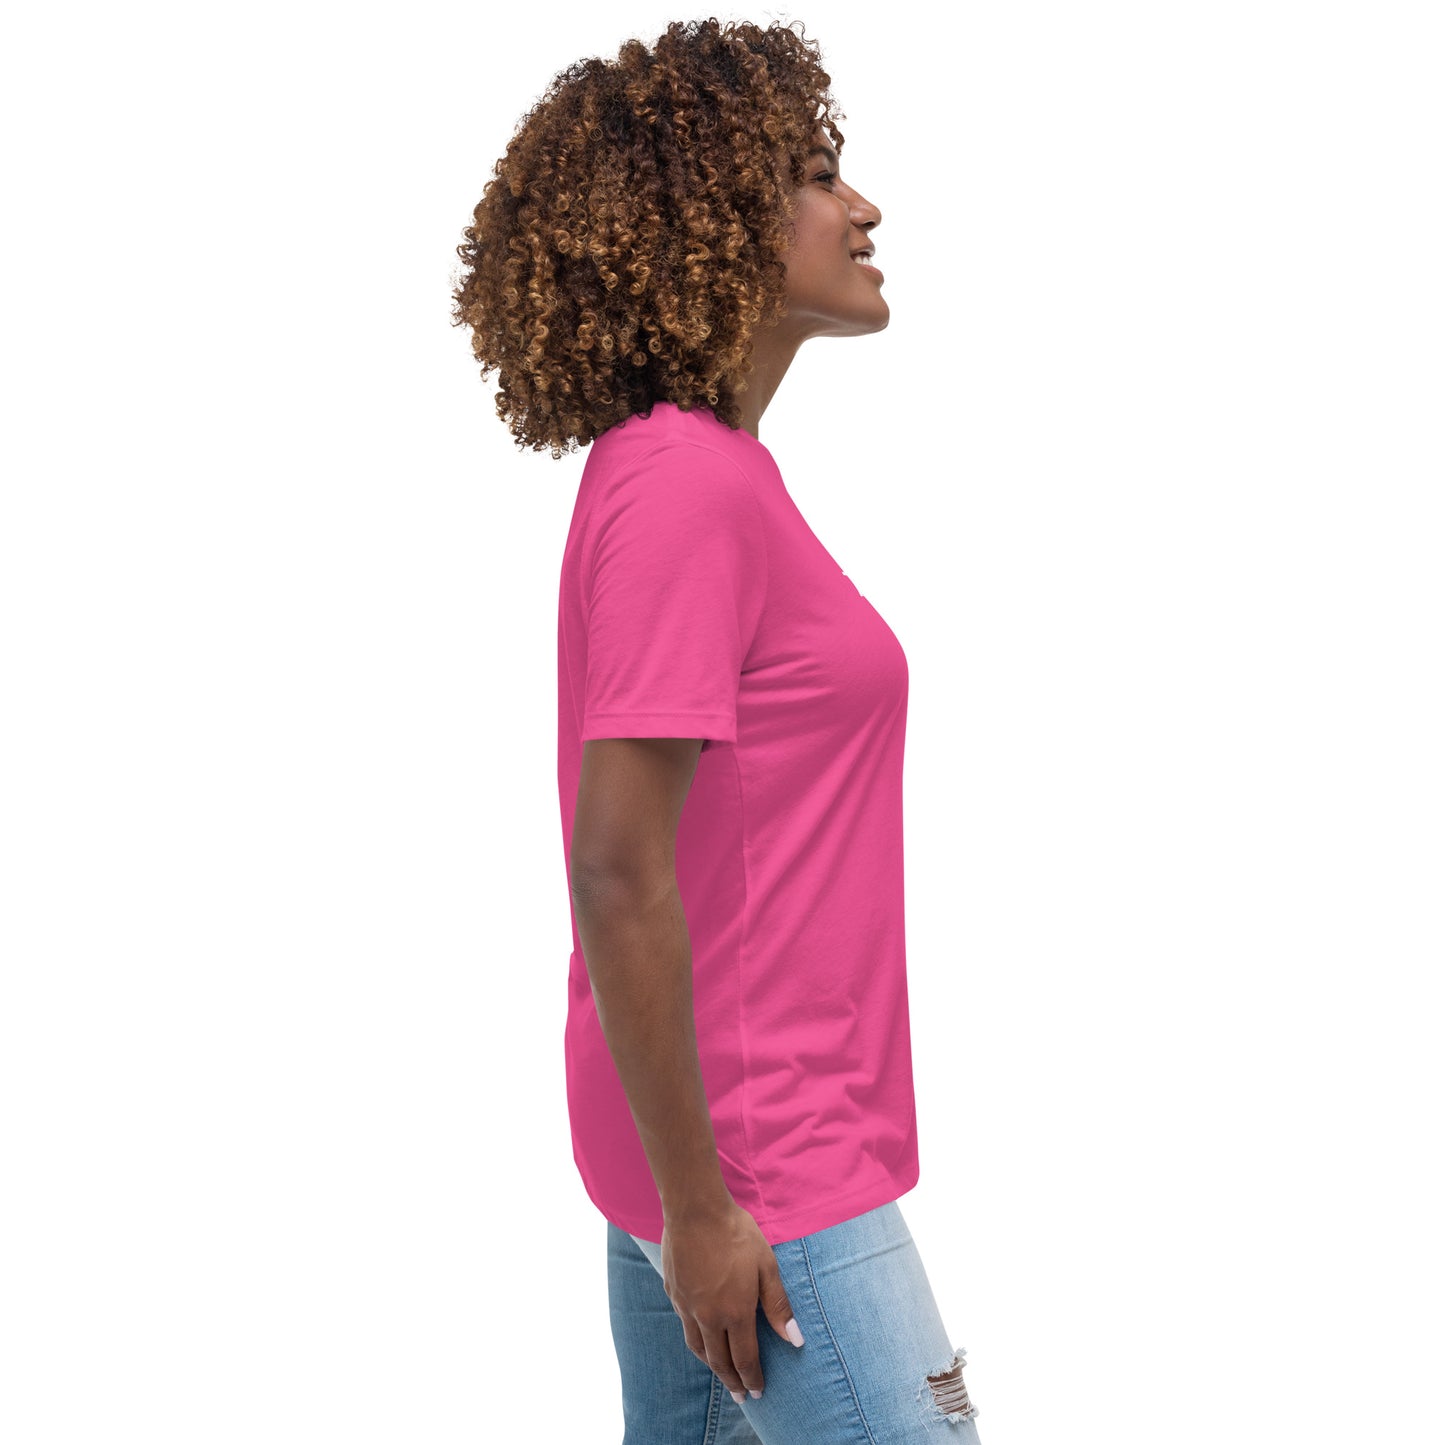 TrainLearnLive- Women's Relaxed Fit